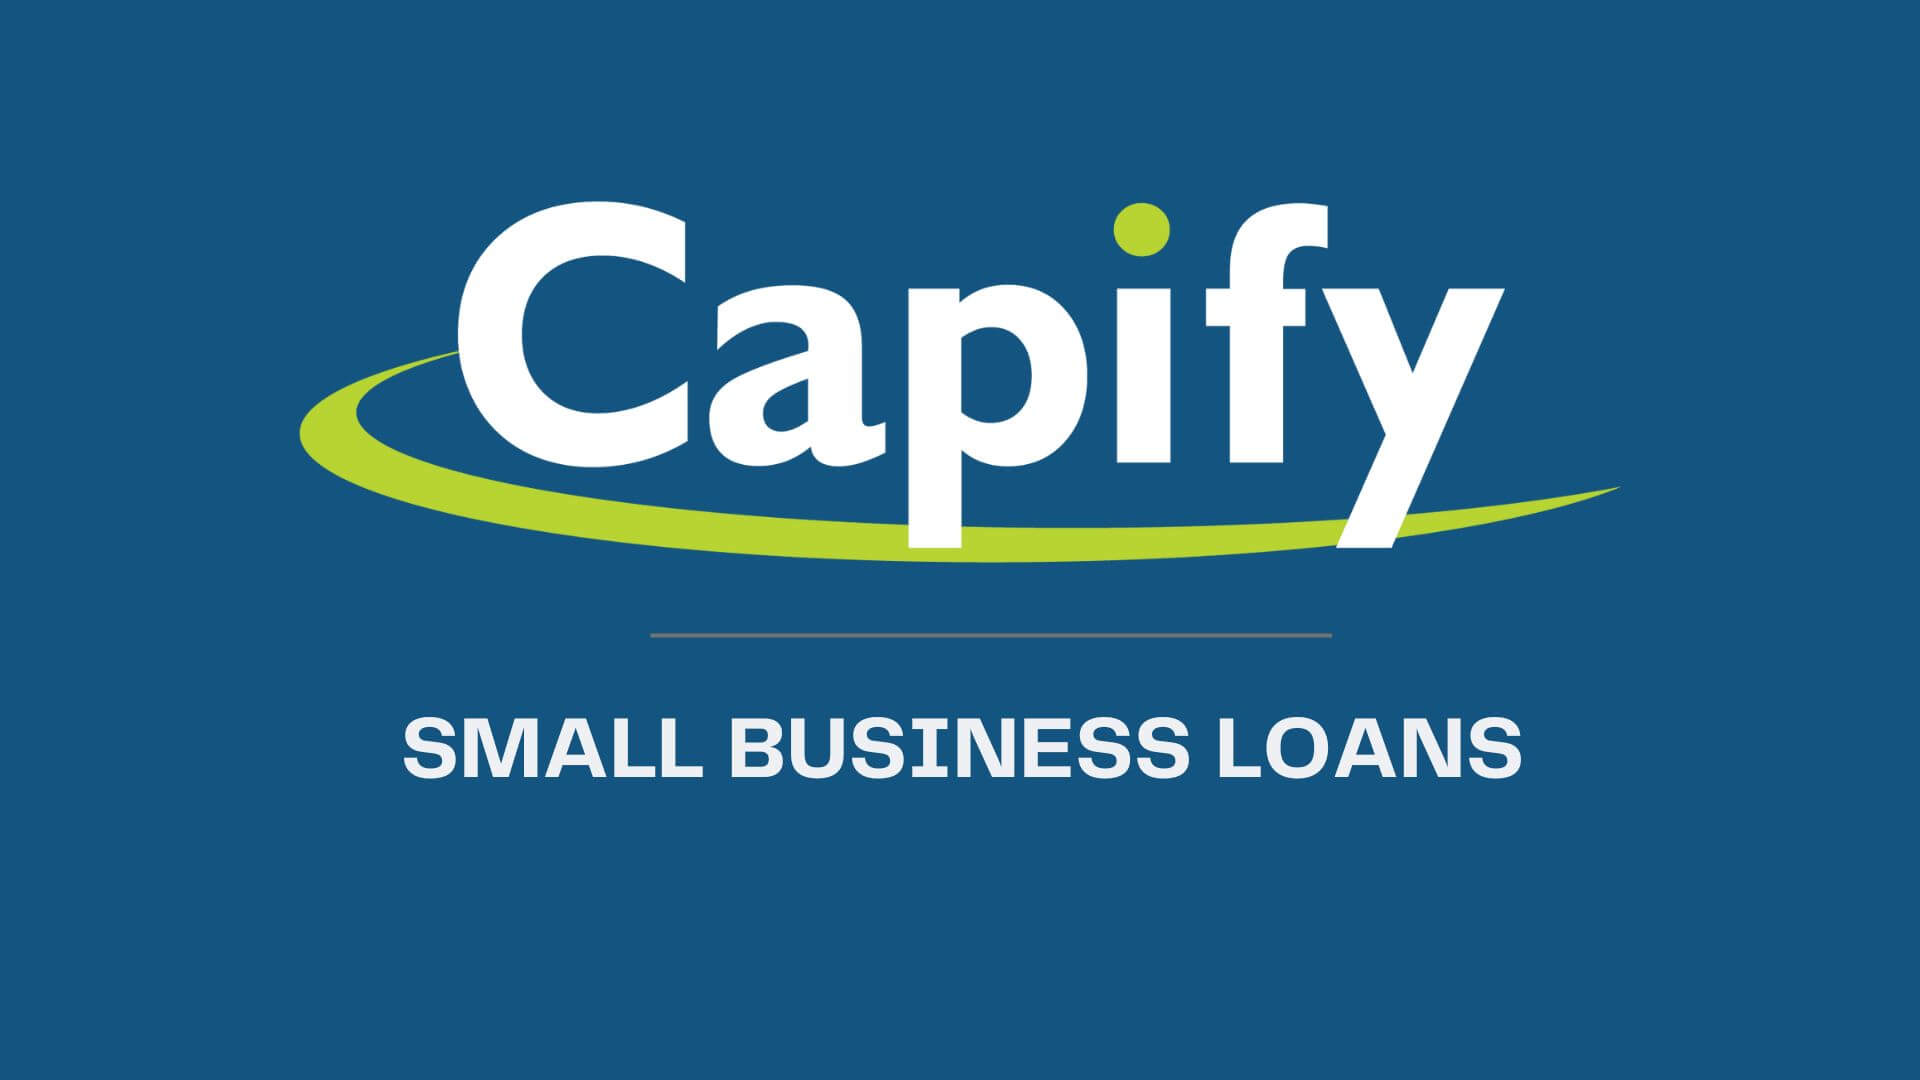 Capify - SMALL BUSINESS LOANS